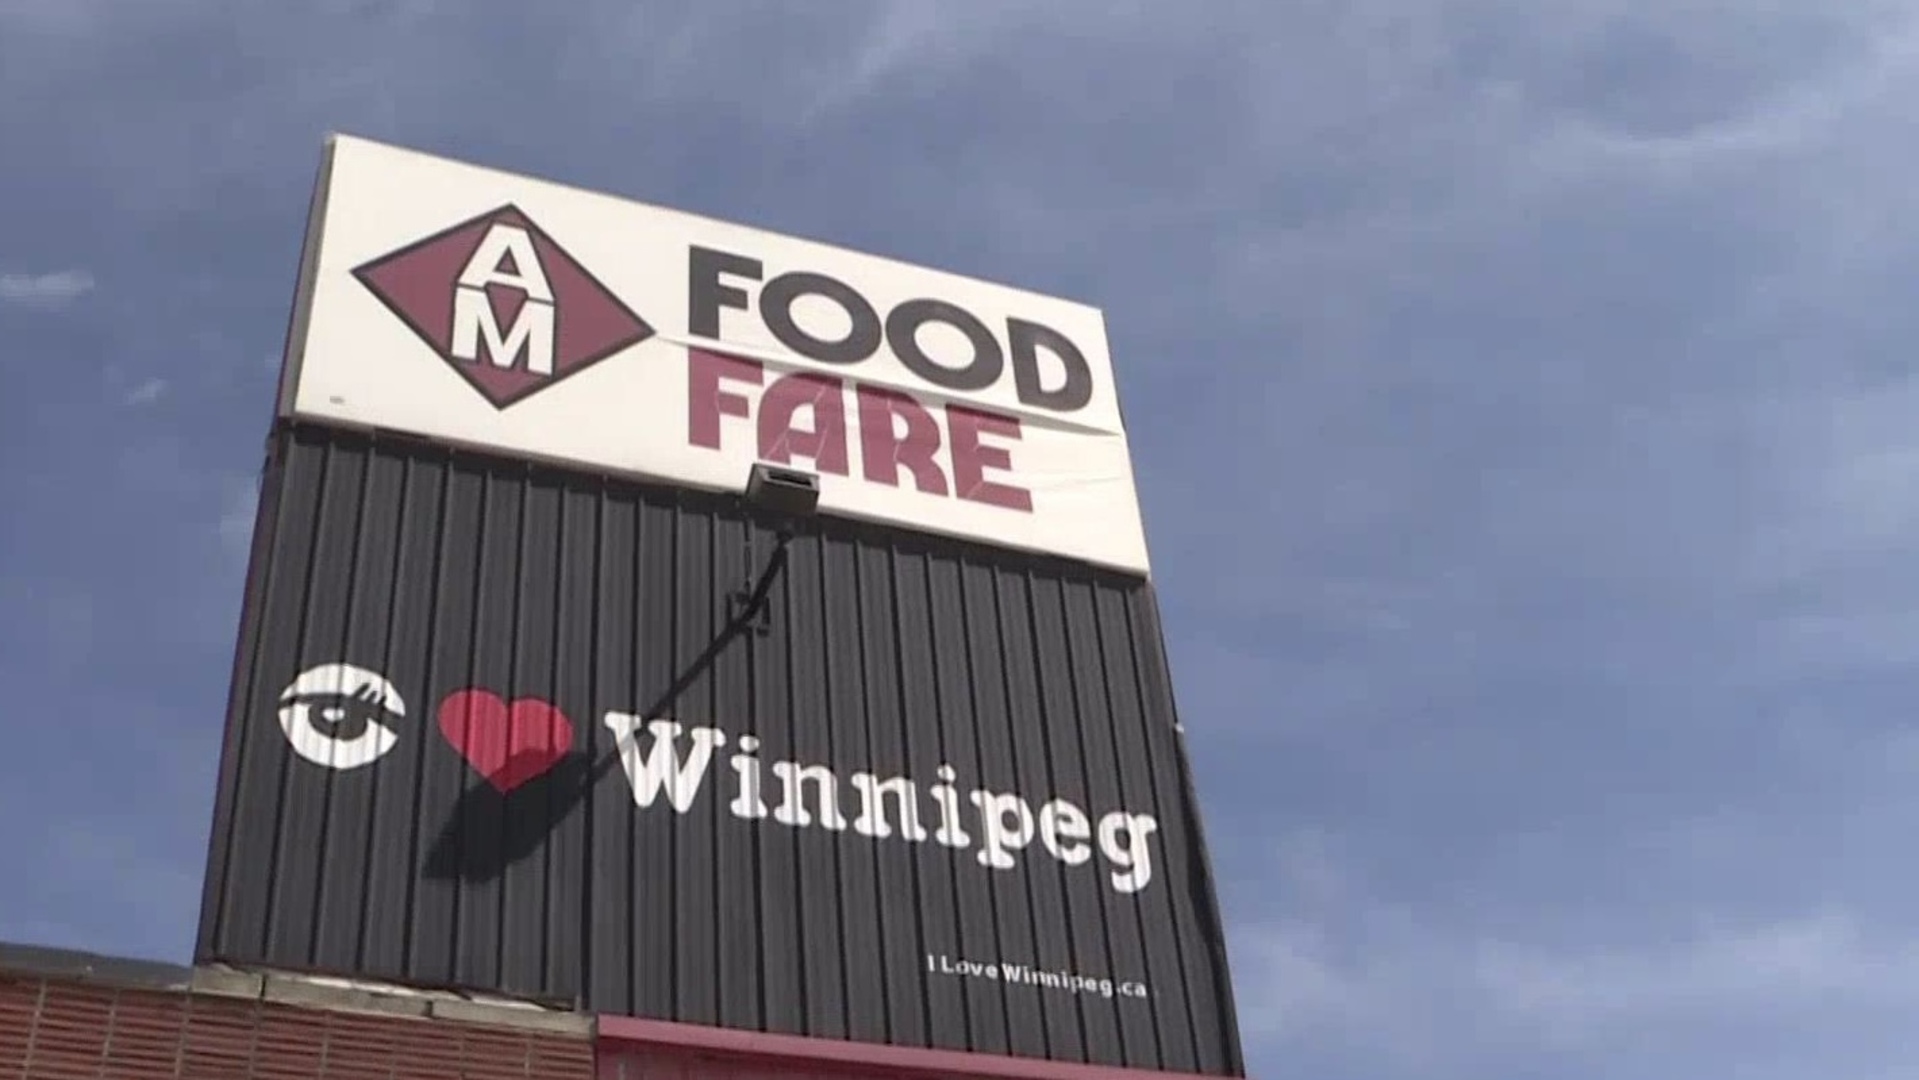 Witness wants charges laid in reported attack at Winnipeg store by staff